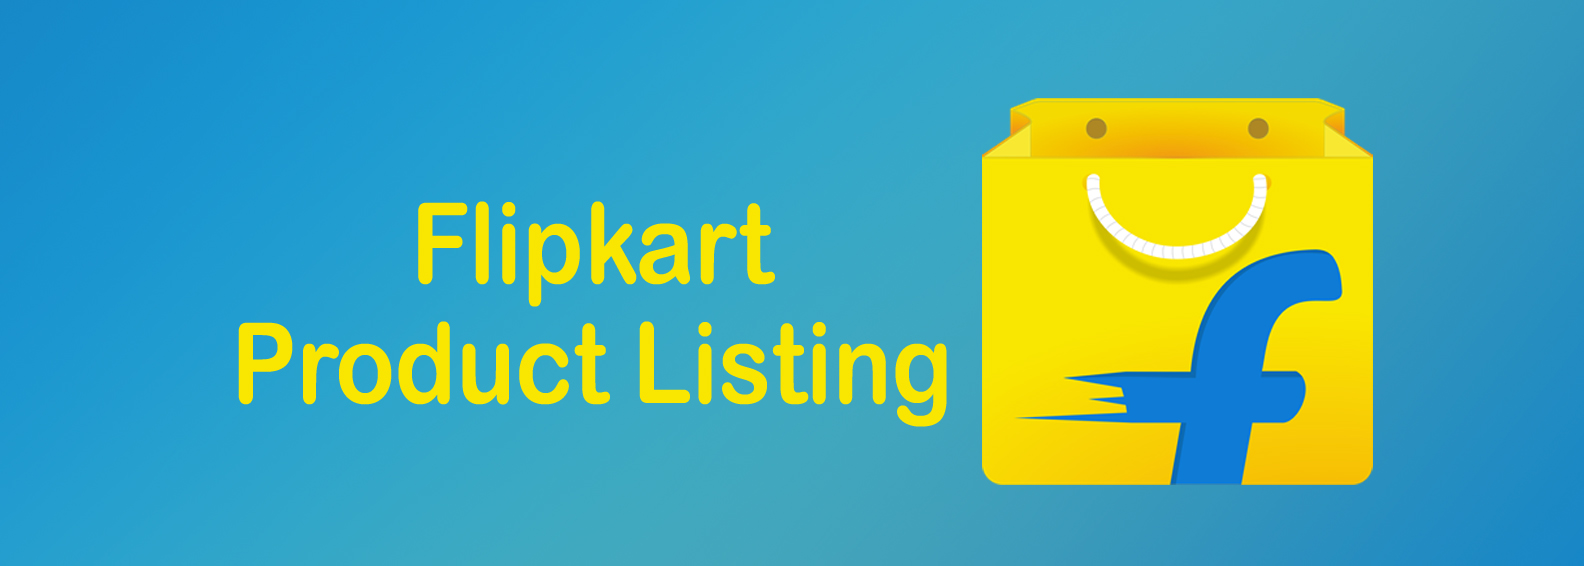 Flipkart Product Listing Services in India